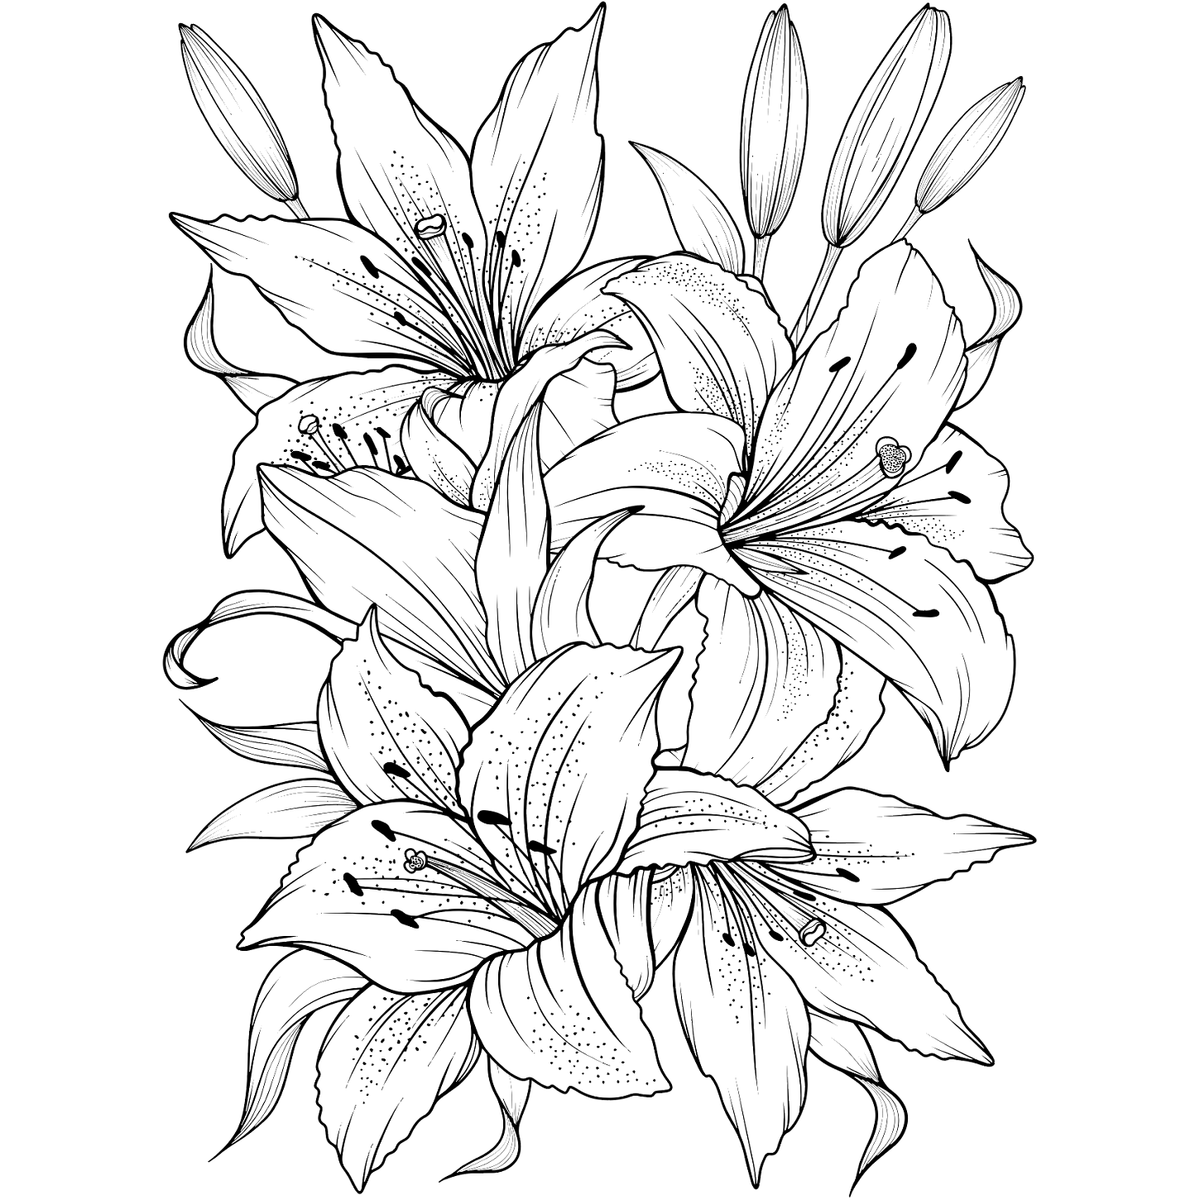 COLOR ME IN offers a variety of exquisite adult coloring pages, including their popular Color My Lily collection, perfect for those looking to express creativity and relax.